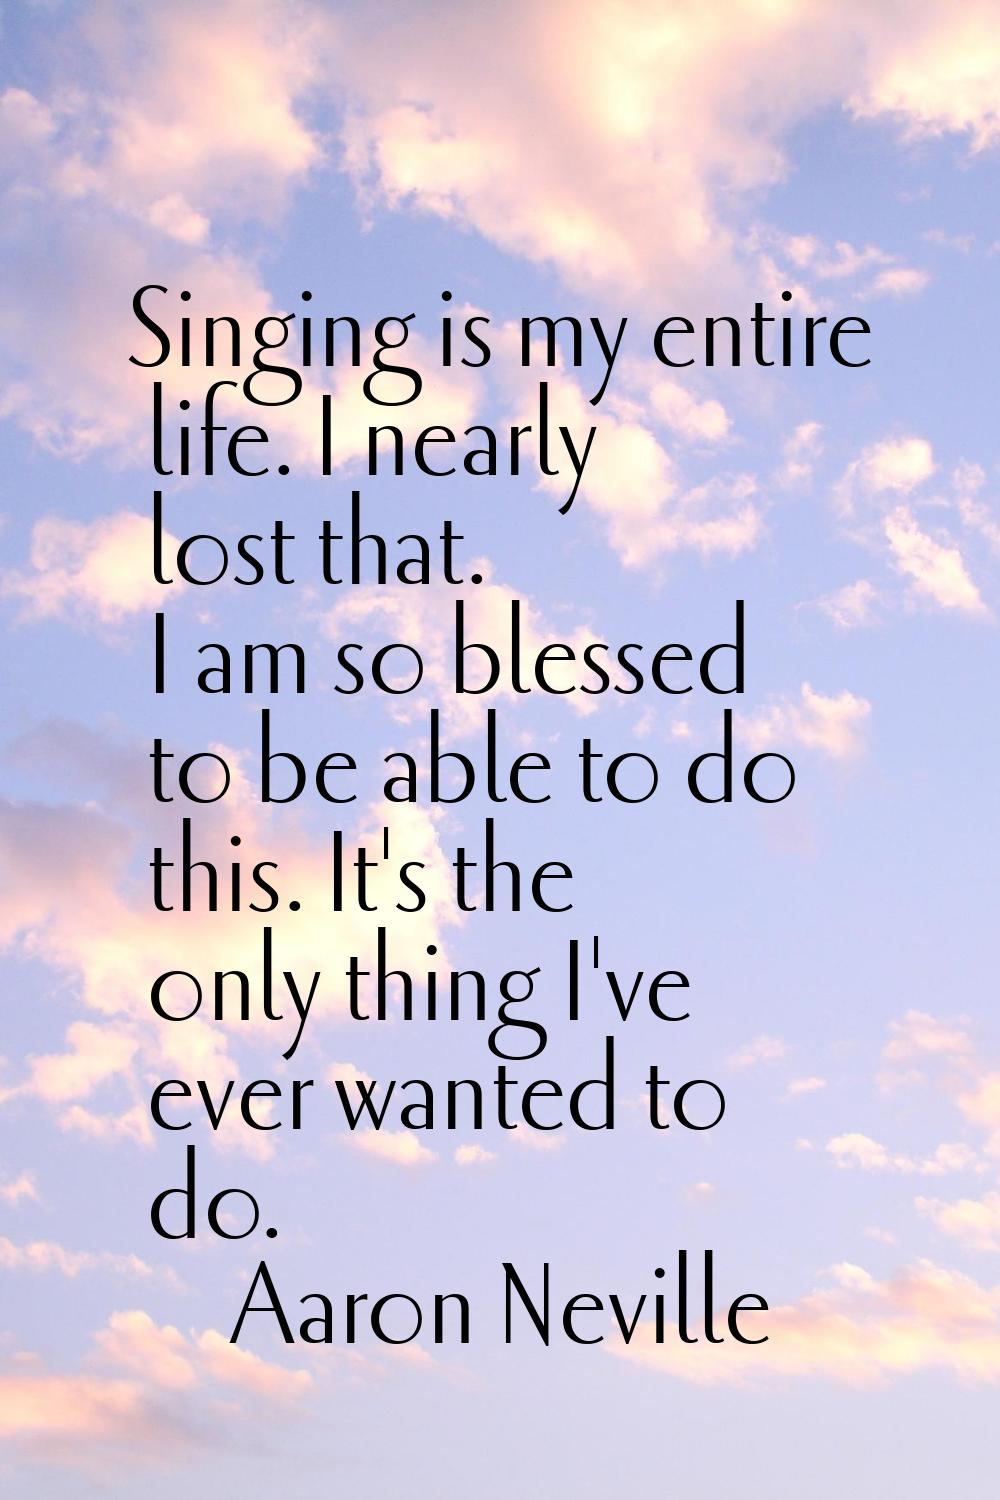 Singing is my entire life. I nearly lost that. I am so blessed to be able to do this. It's the only